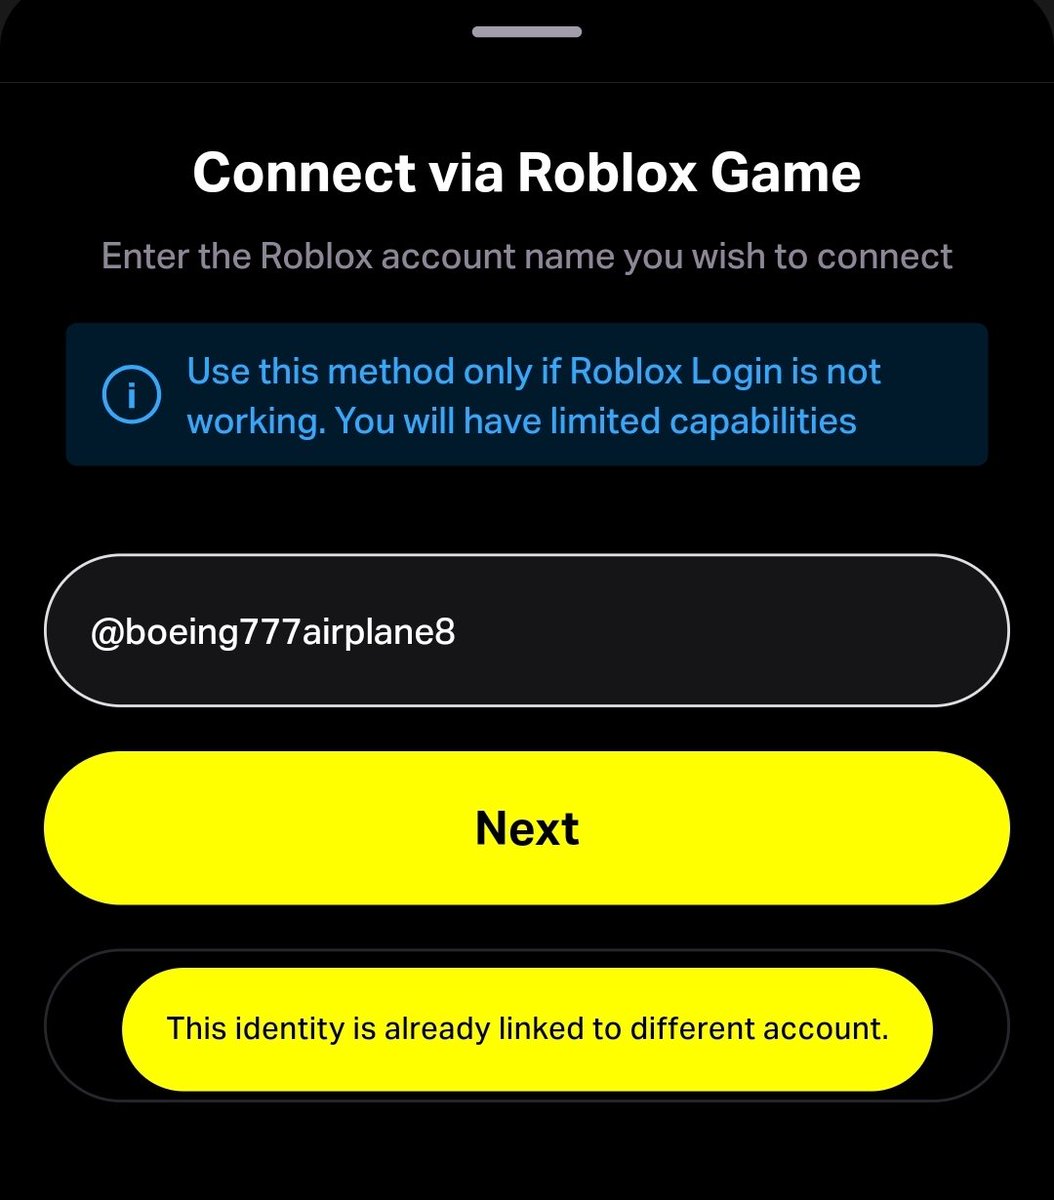 I'm having troubling with linking my Roblox account. I mistakenly disabled my Roblox account which is already linked to my Roblox account on Freshcut. What do I do?

(i'm not listening to bots)